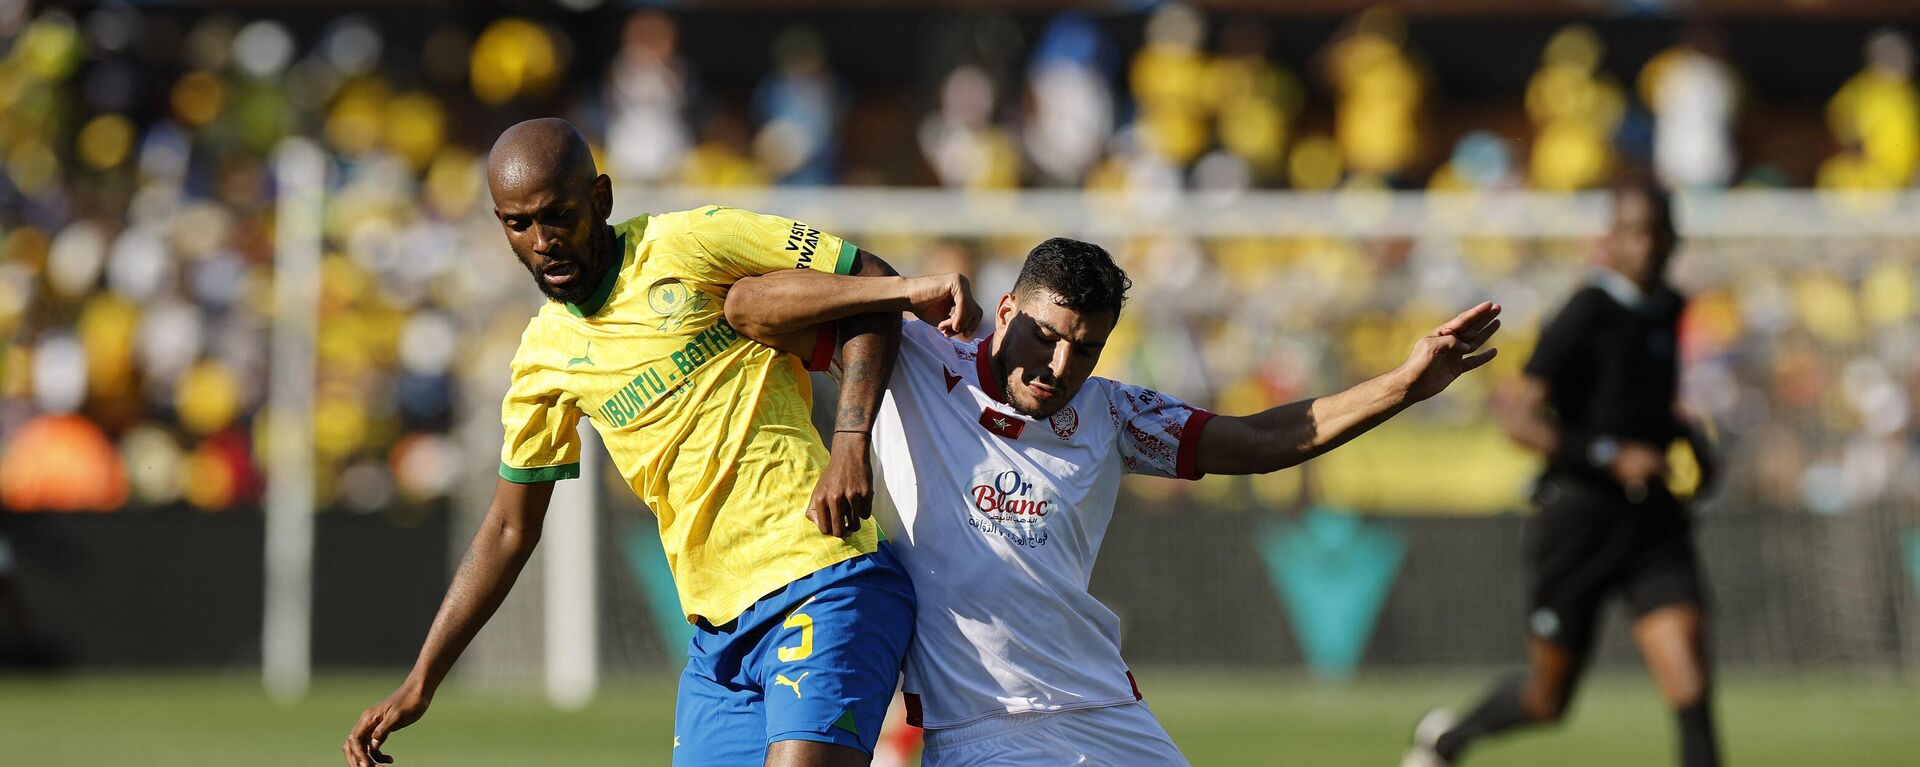 Sundowns' South African defender #5 Mosa Lebusa fights for the ball with Wydad's Algerian midfielder #17 Zakaria Draoui during the African Football League (AFL) second-leg final match between Mamelodi Sundowns  and Wydad Casablanca at Loftus Versveld in Pretoria on November 12, 2023.  - Sputnik Africa, 1920, 12.11.2023